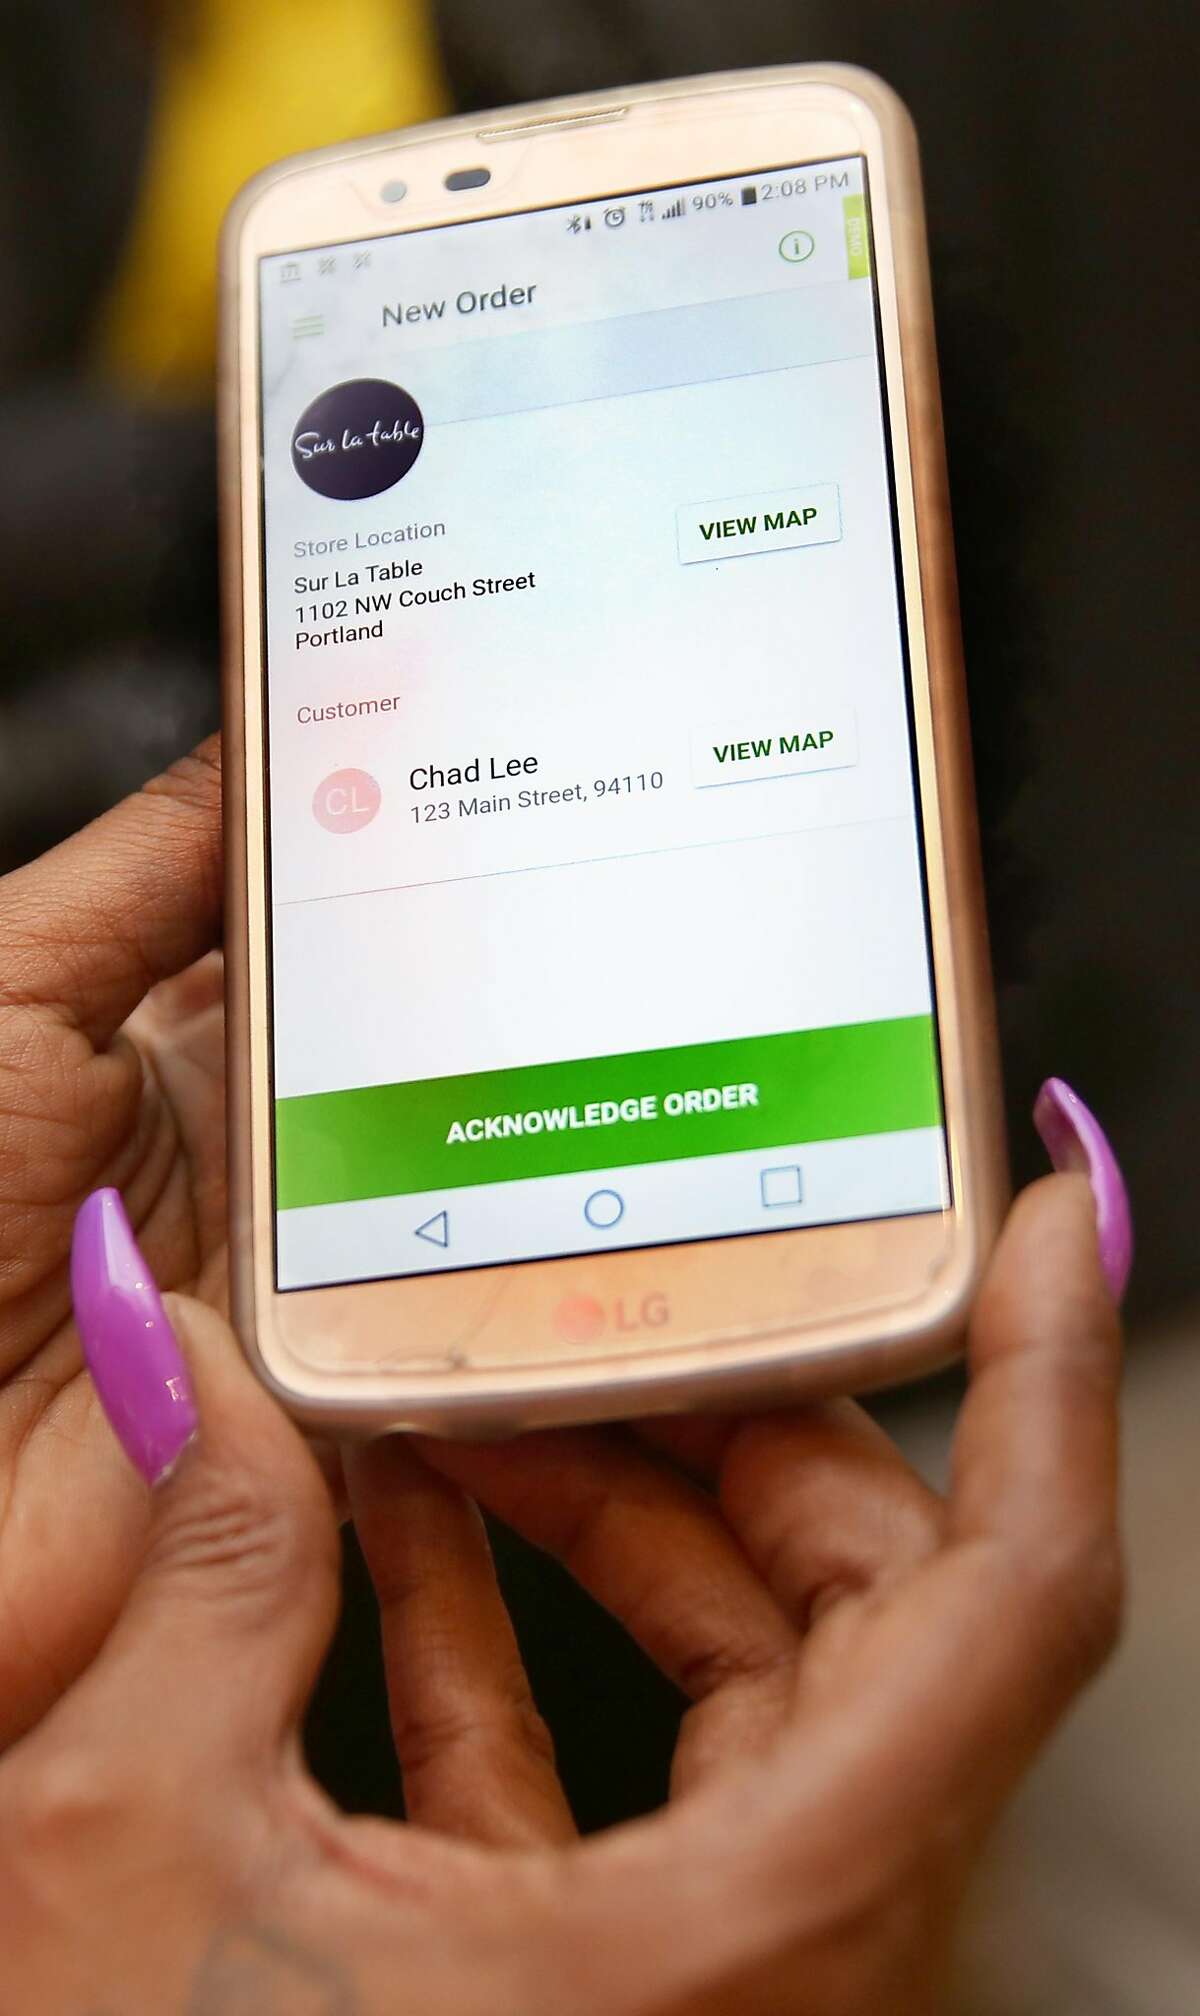 InstaCart shopper LaVerne Oakley gets a dummy order to practice shopping at kitchen-supply store Sur La Table on Monday, April 24, 2017, in San Francisco, Calif.